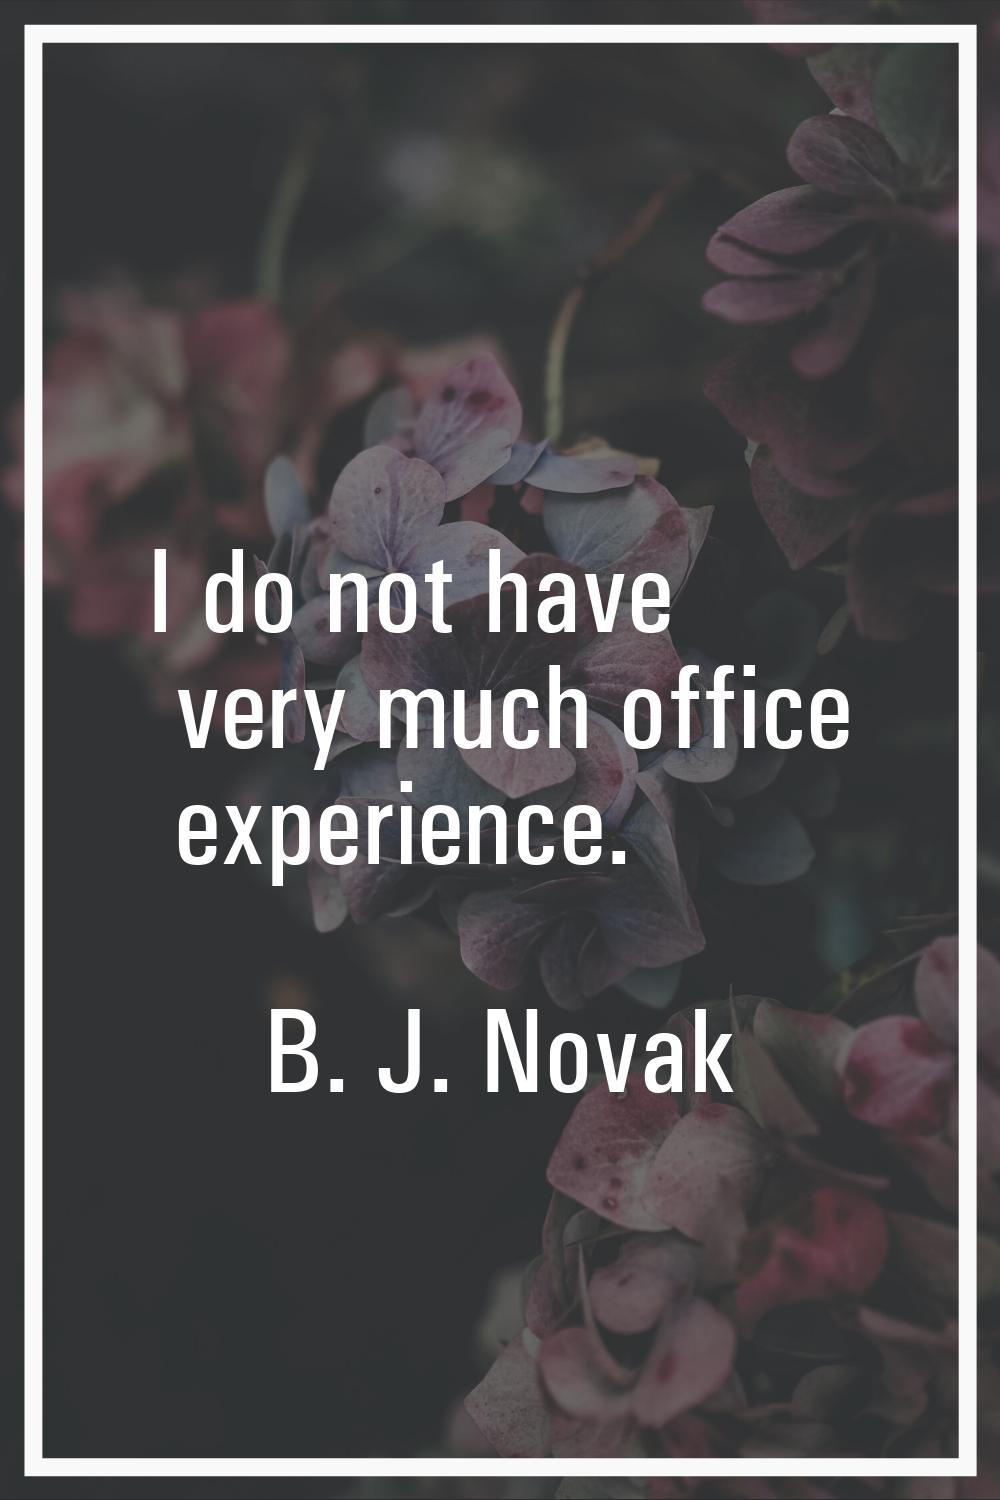 I do not have very much office experience.